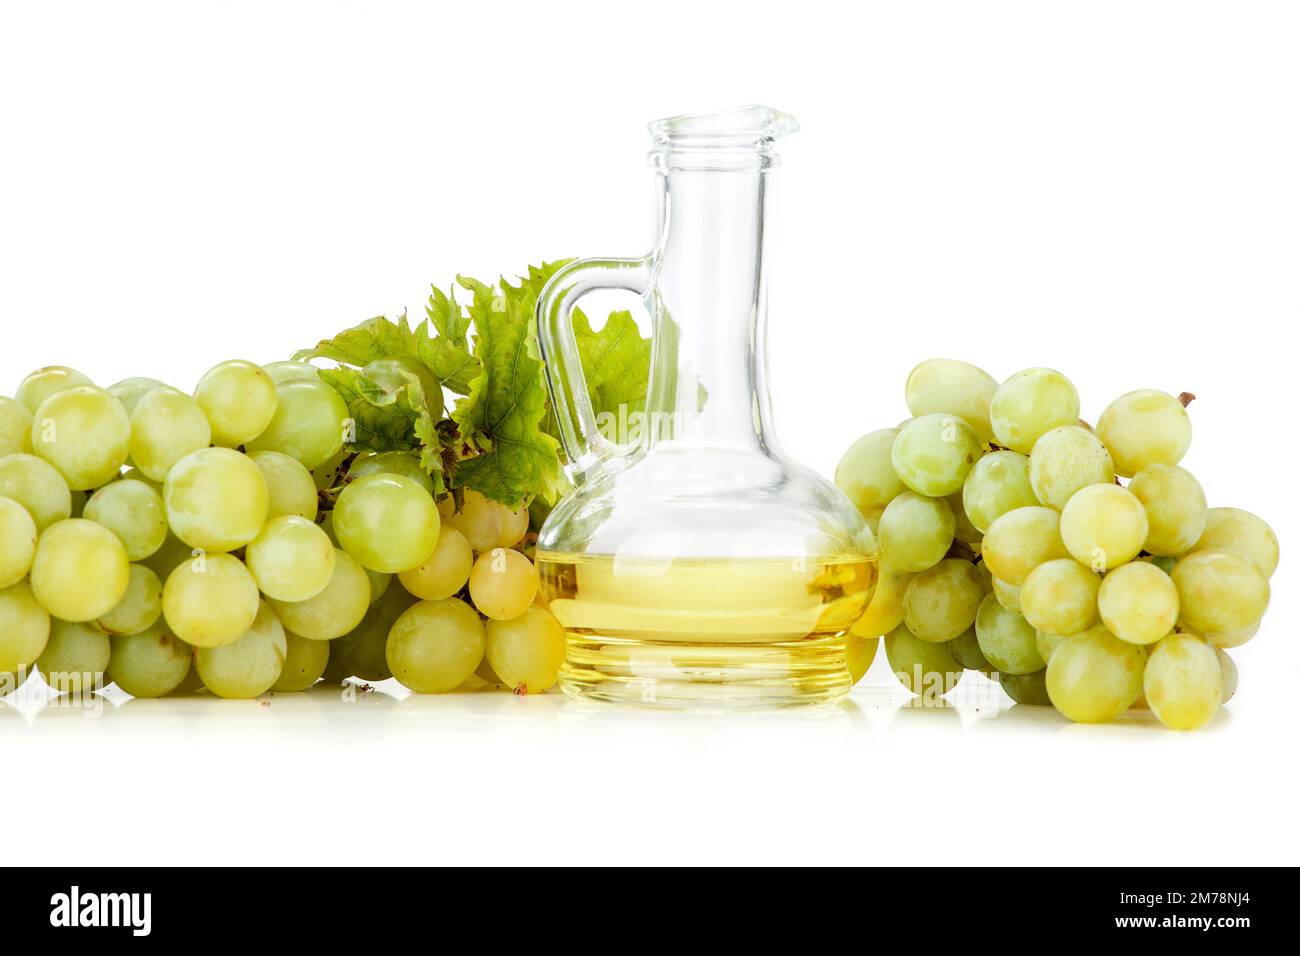 Grape seed oil on white background. The image also shows light grapes and dark grapes arranged on a white background Stock Photo